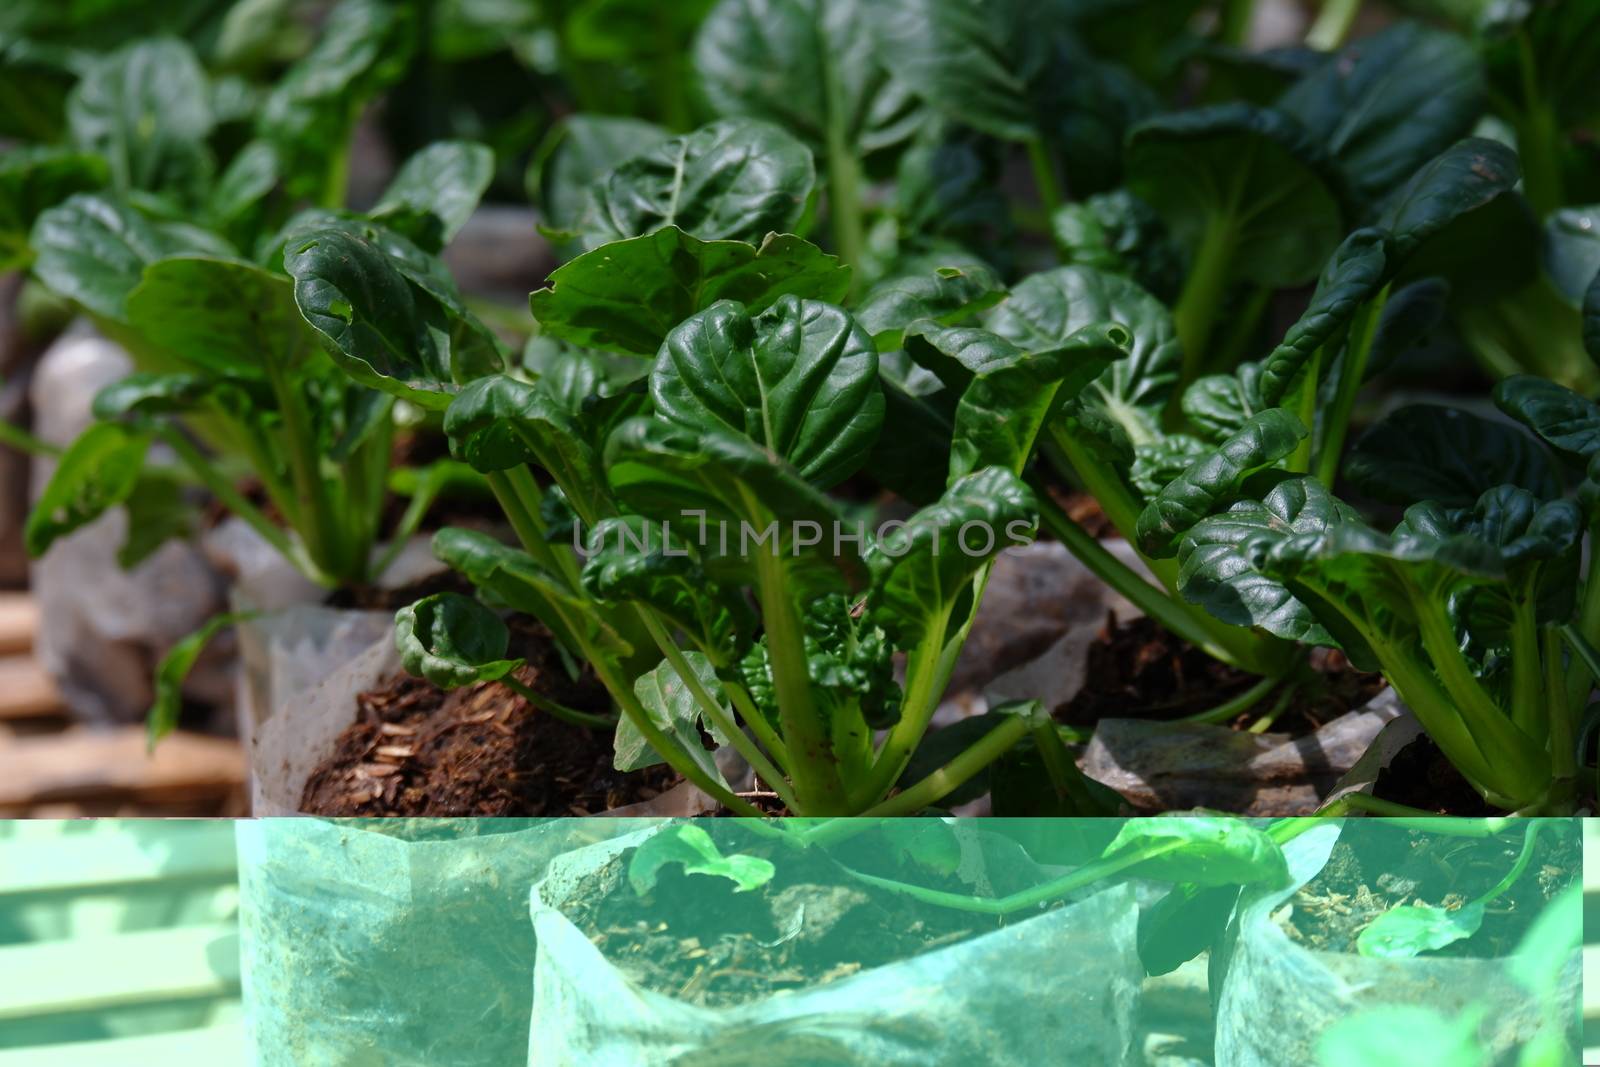 Sawi Pagoda / Ta Ke Chai / Tatsoi. This Mustard Pagoda comes from China. Has an oval leaf shape, a very striking dark green color, and the stems and leaves are crisp and resistant to cold temperatures